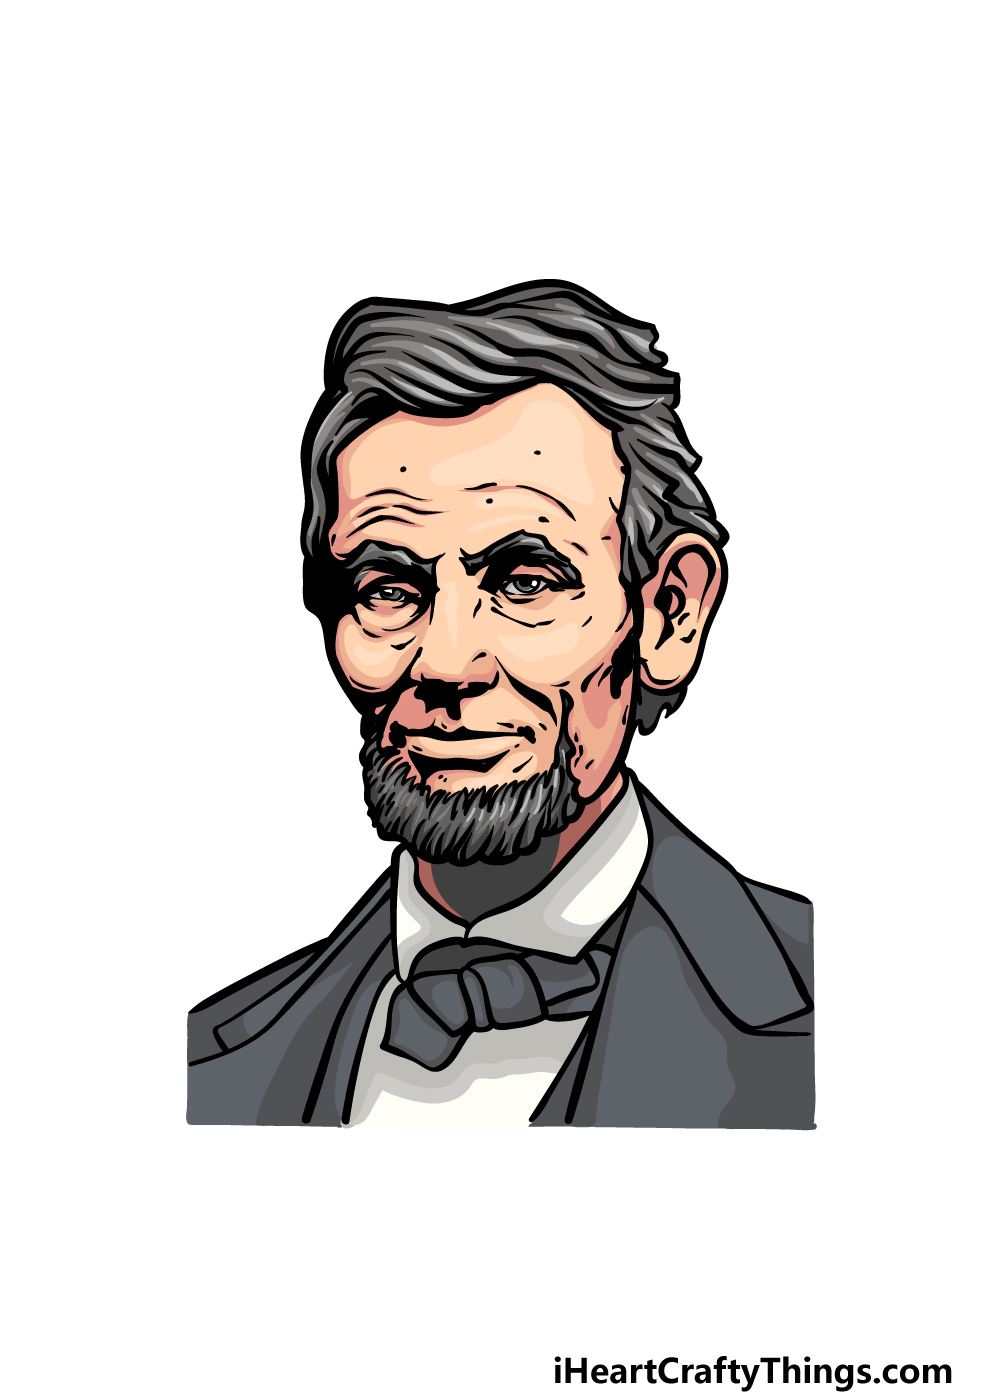 Abraham Lincoln Drawing - How To Draw Abraham Lincoln Step By Step